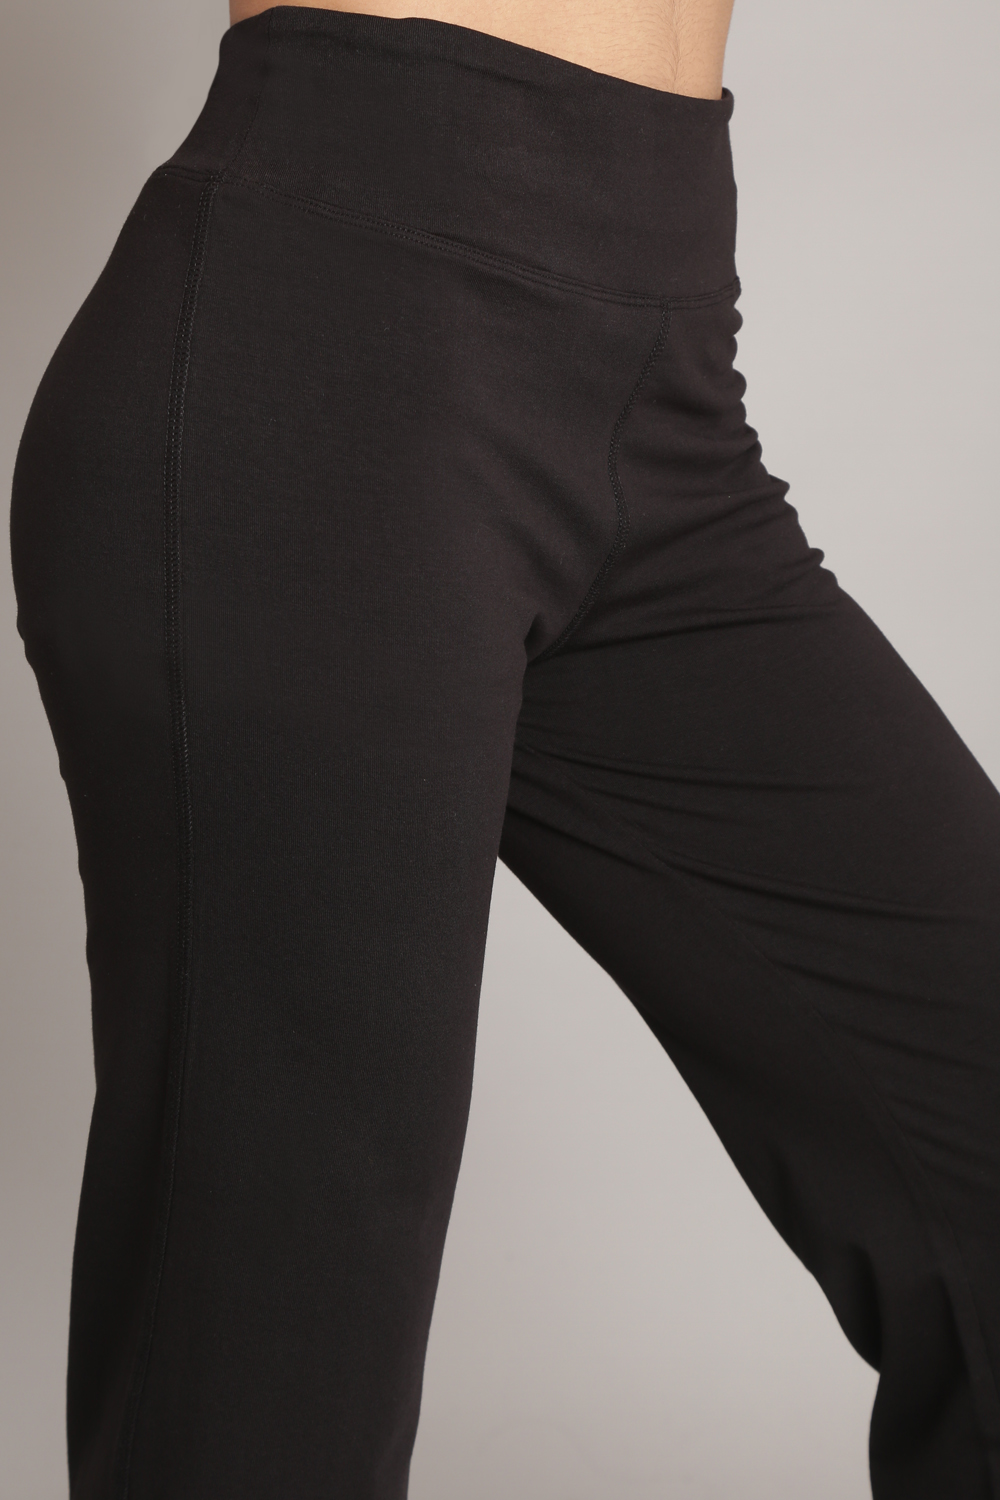 Buy Black Knitted Cotton Blend Yoga Pants (Yoga Pants) for INR850